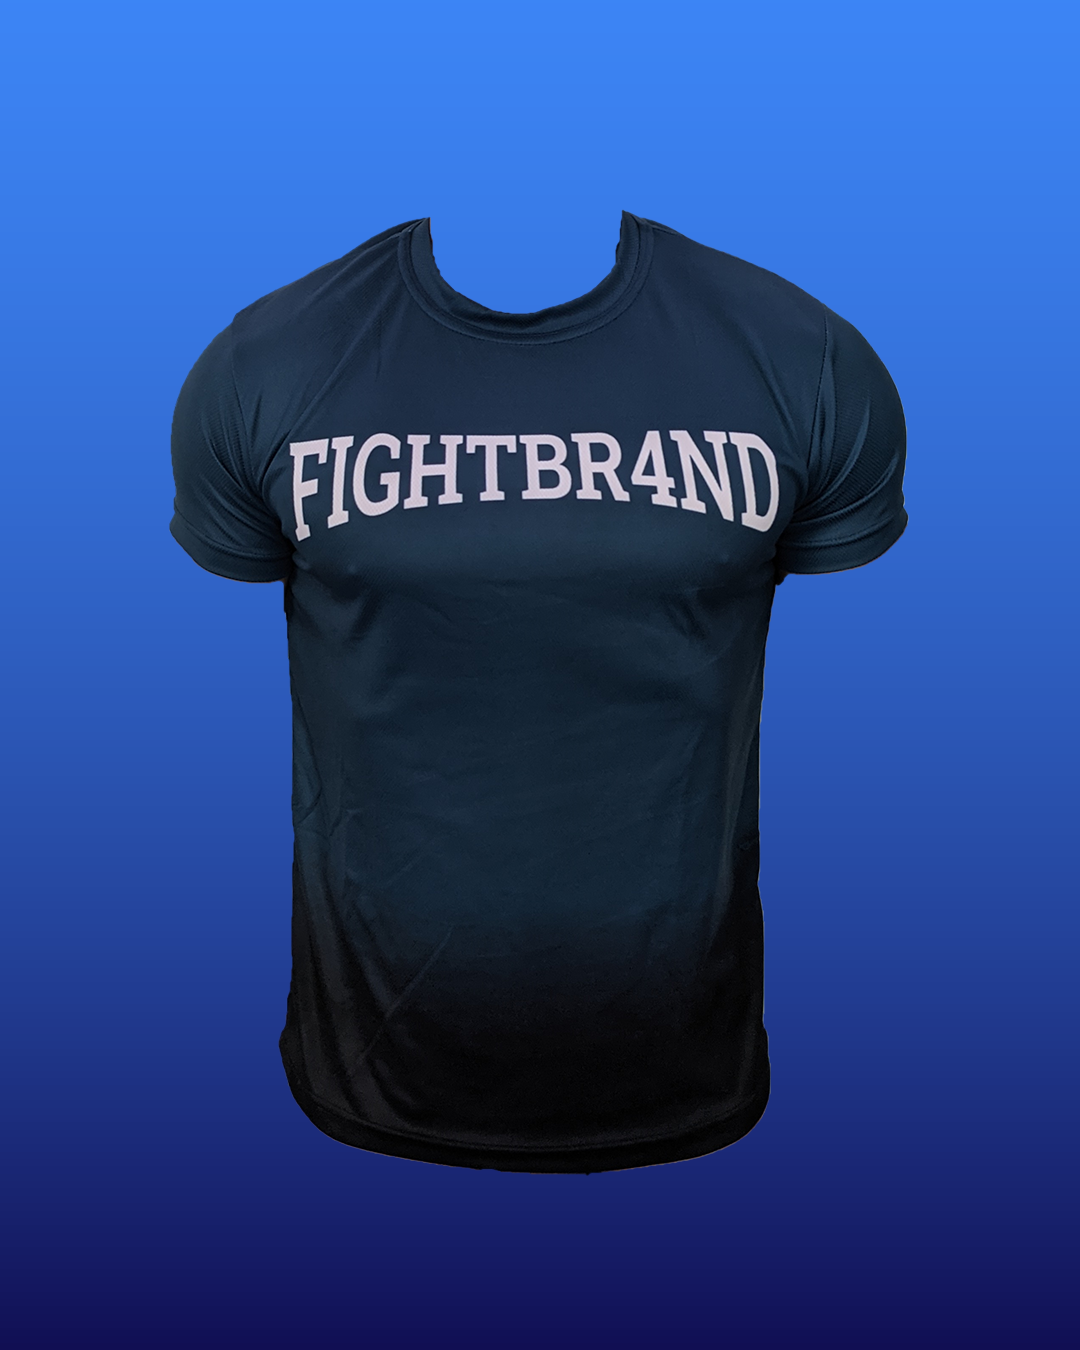 Technical T-shirt with blue and black gradient